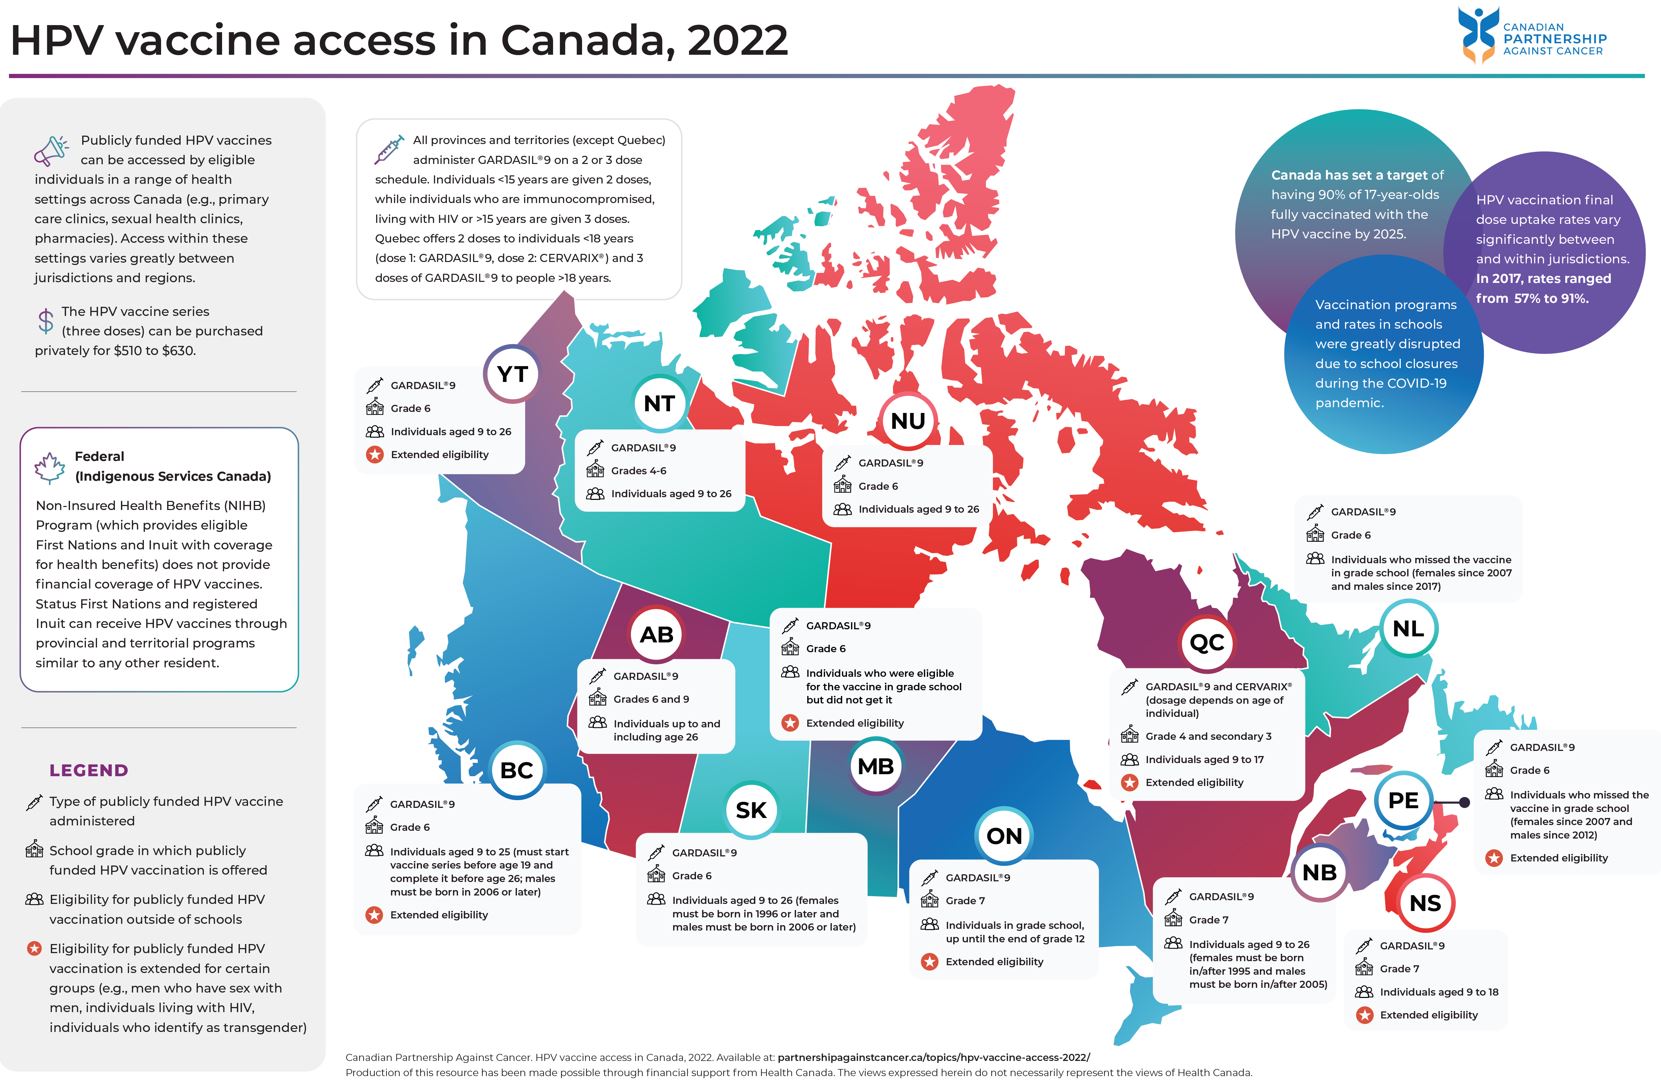 map of Canada showing HPV vaccine access